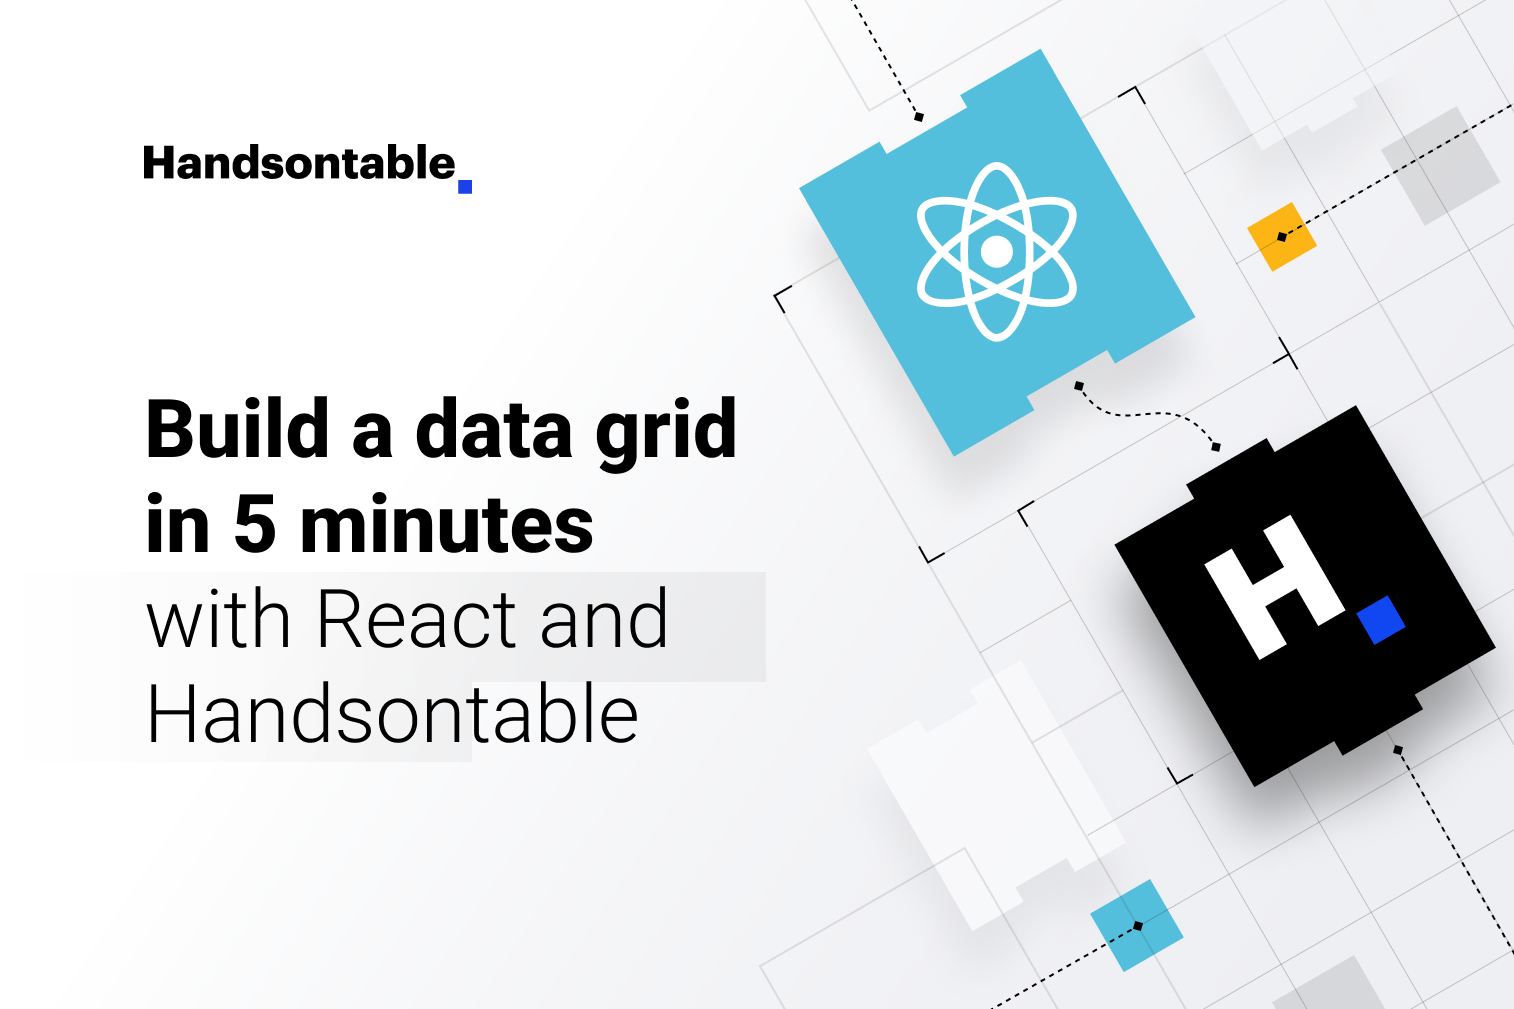 Build a data grid in 5 minutes with React and Handsontable